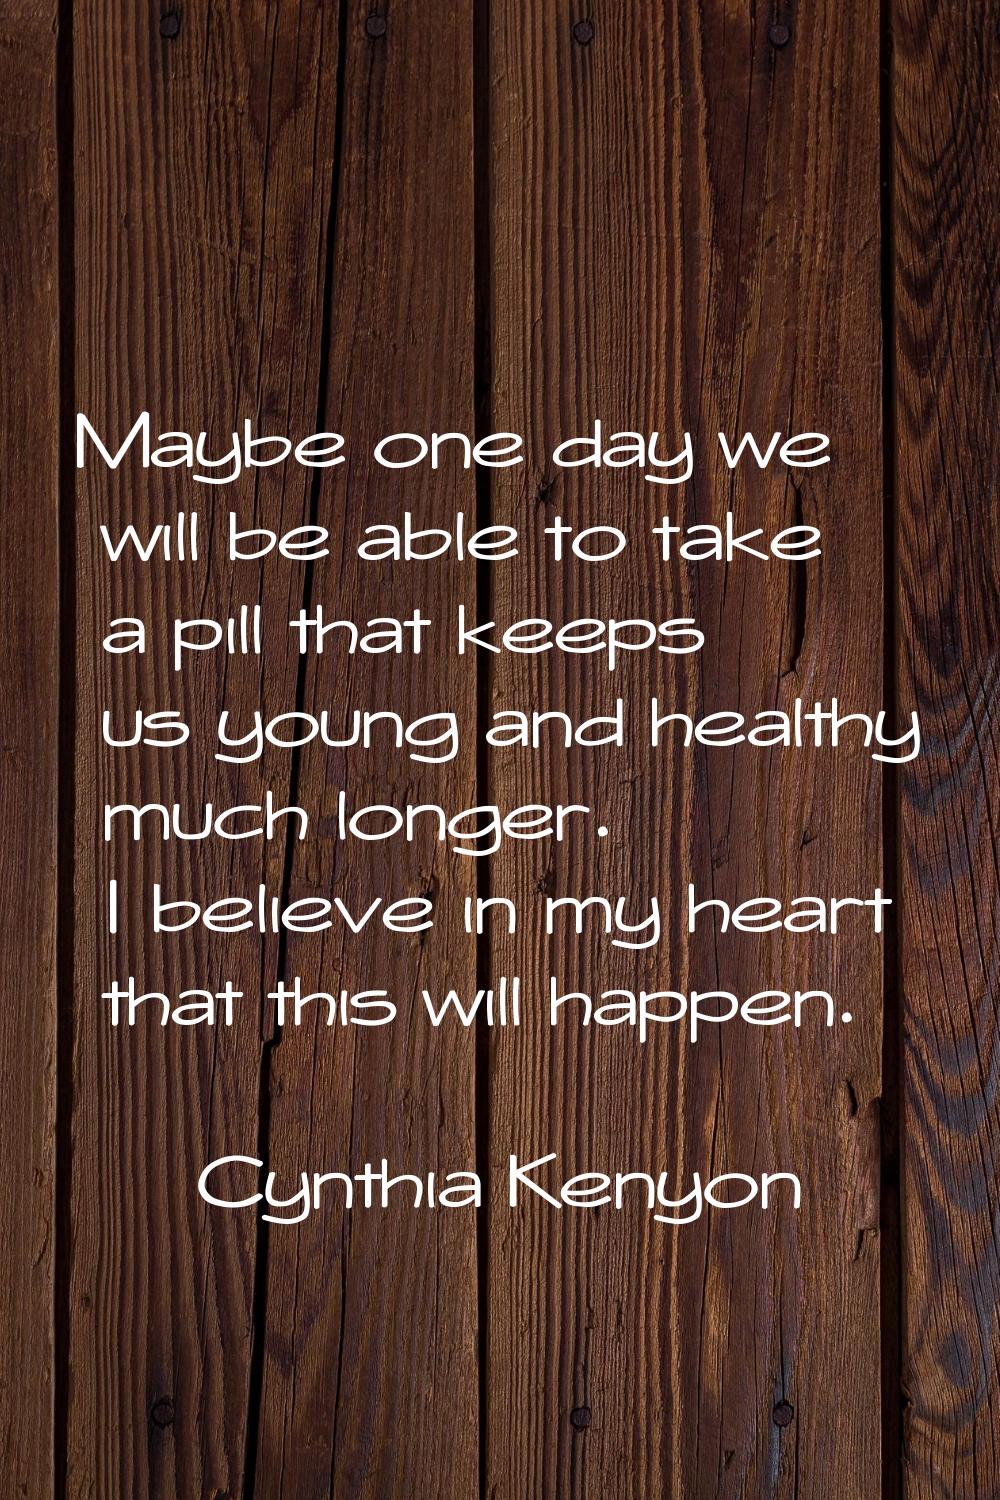 Maybe one day we will be able to take a pill that keeps us young and healthy much longer. I believe